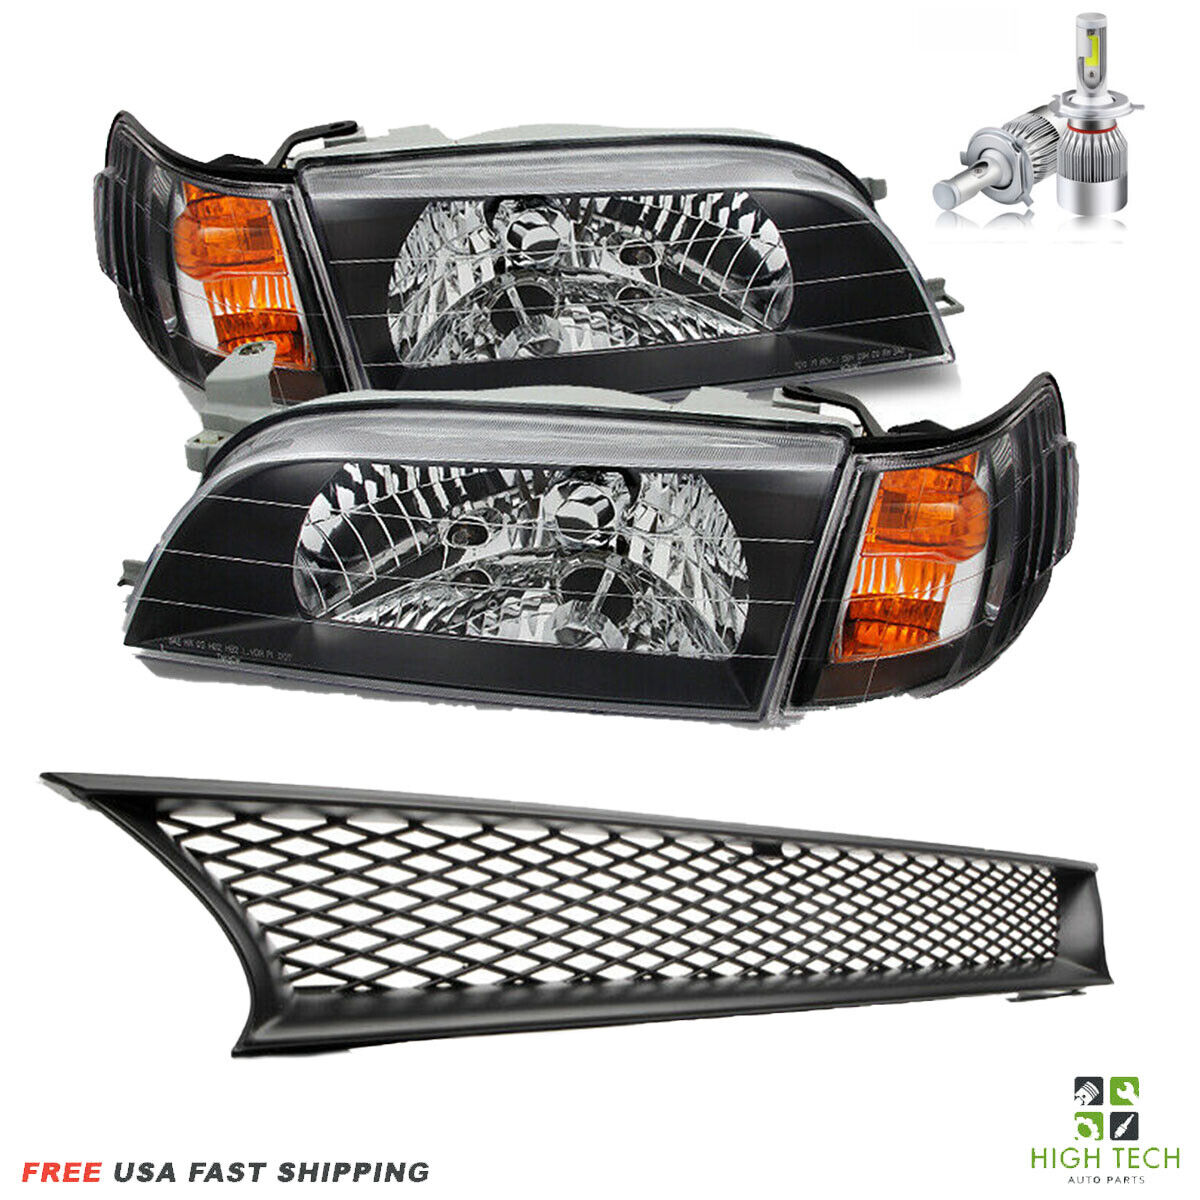 For Toyota Corolla 93-97 Headlights Black + H4 Led Bulbs + Front Grille Mesh